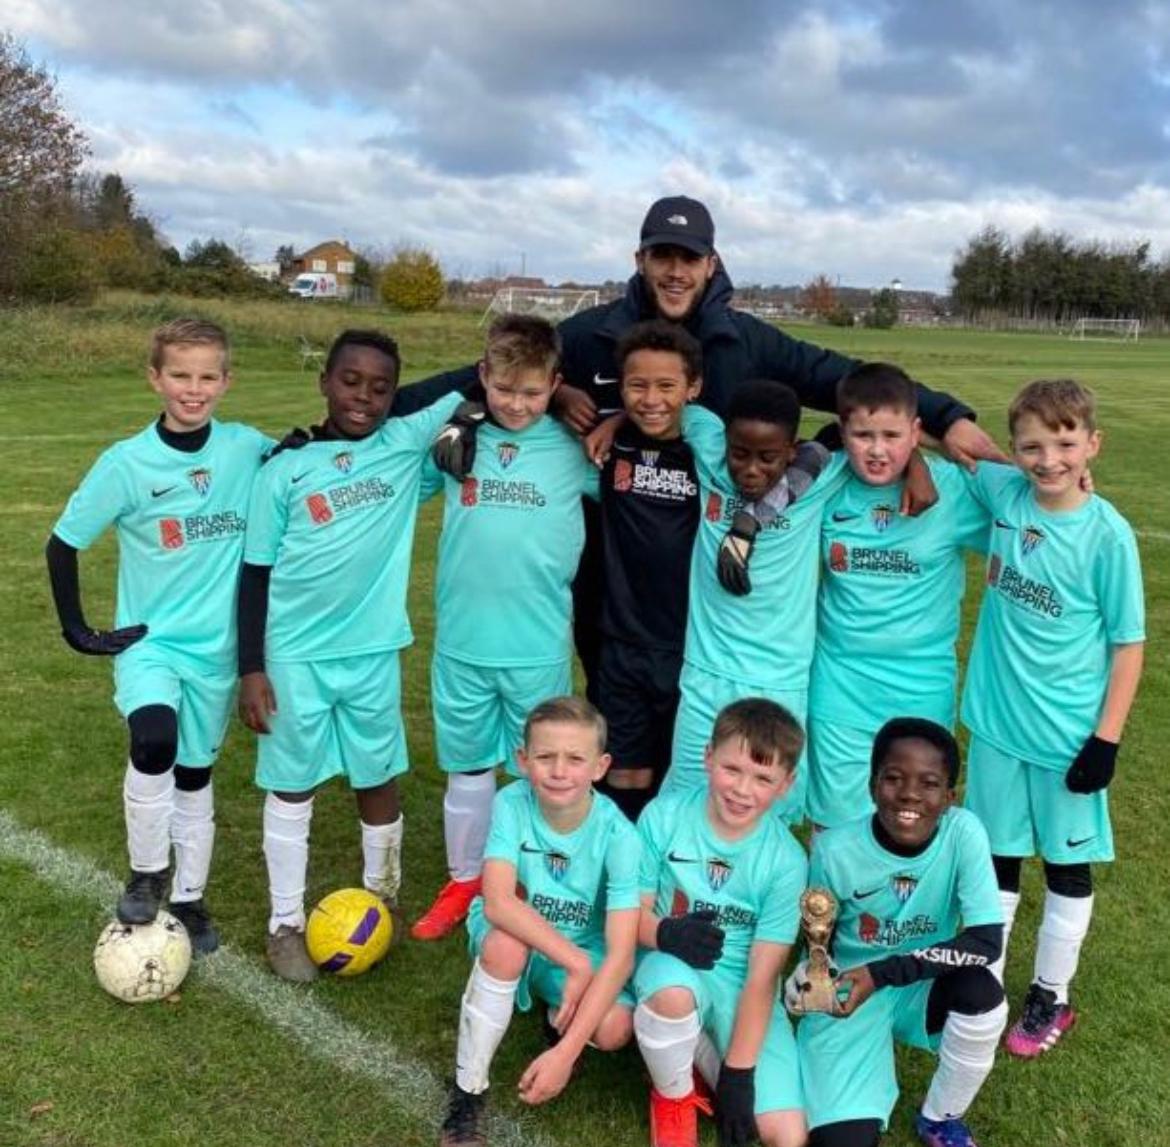 Great to see our local team with their Brunel Shipping kits 🥳 Happy to be sponsoring Jets FC under 11’s blue... and best of luck with their remaining matches ⚽️